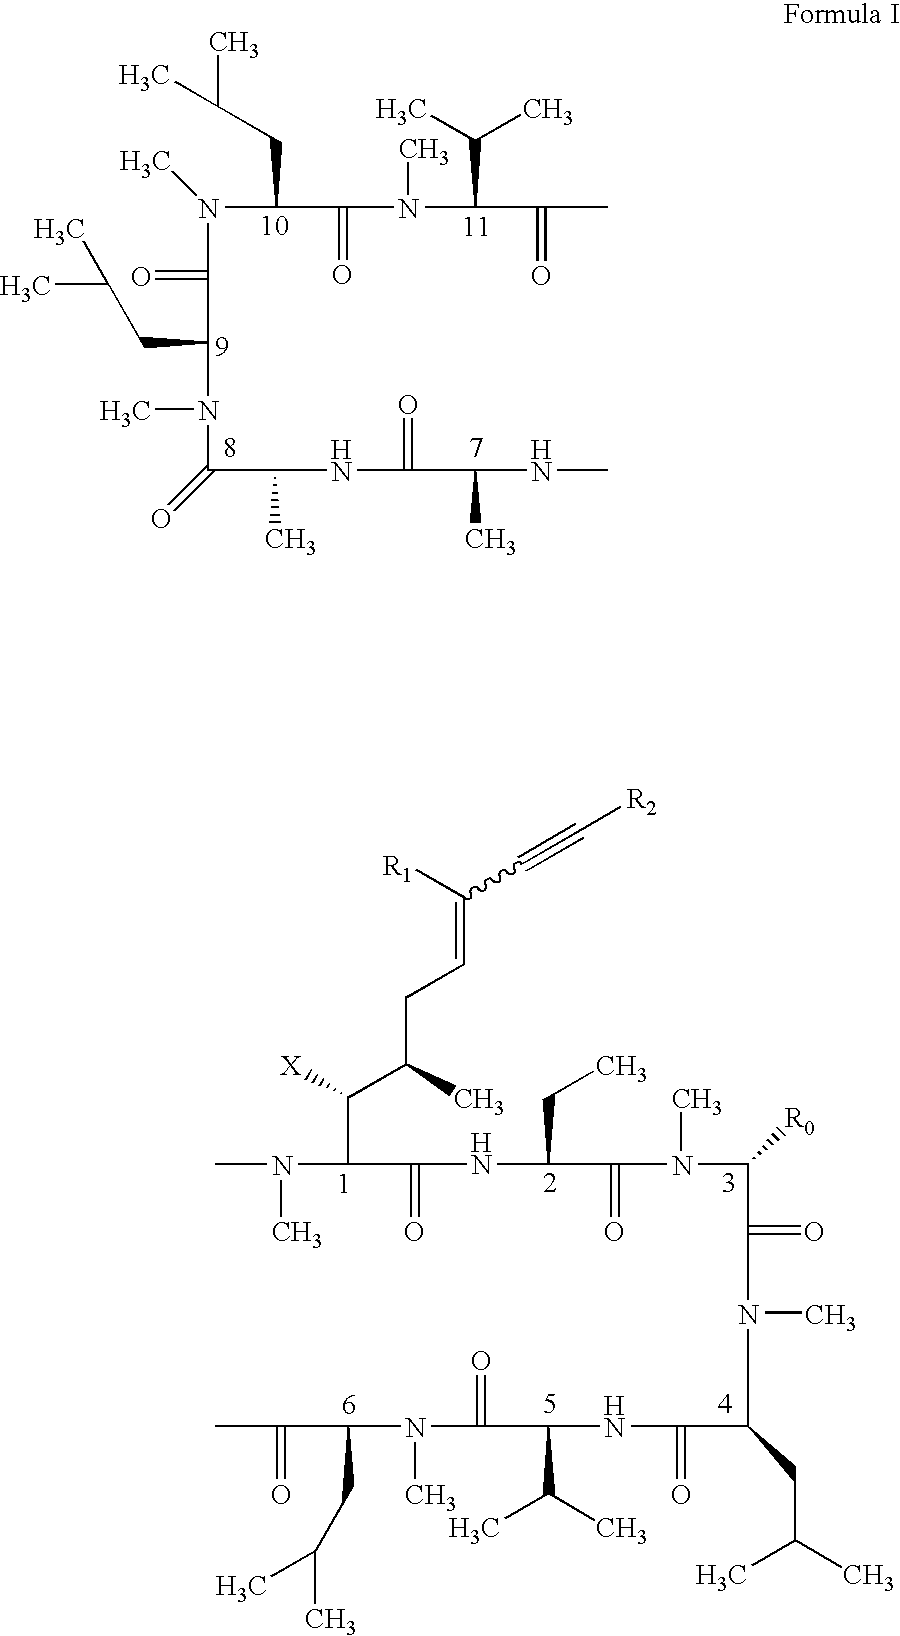 Cyclosporin alkyne analogues and their pharmaceutical uses